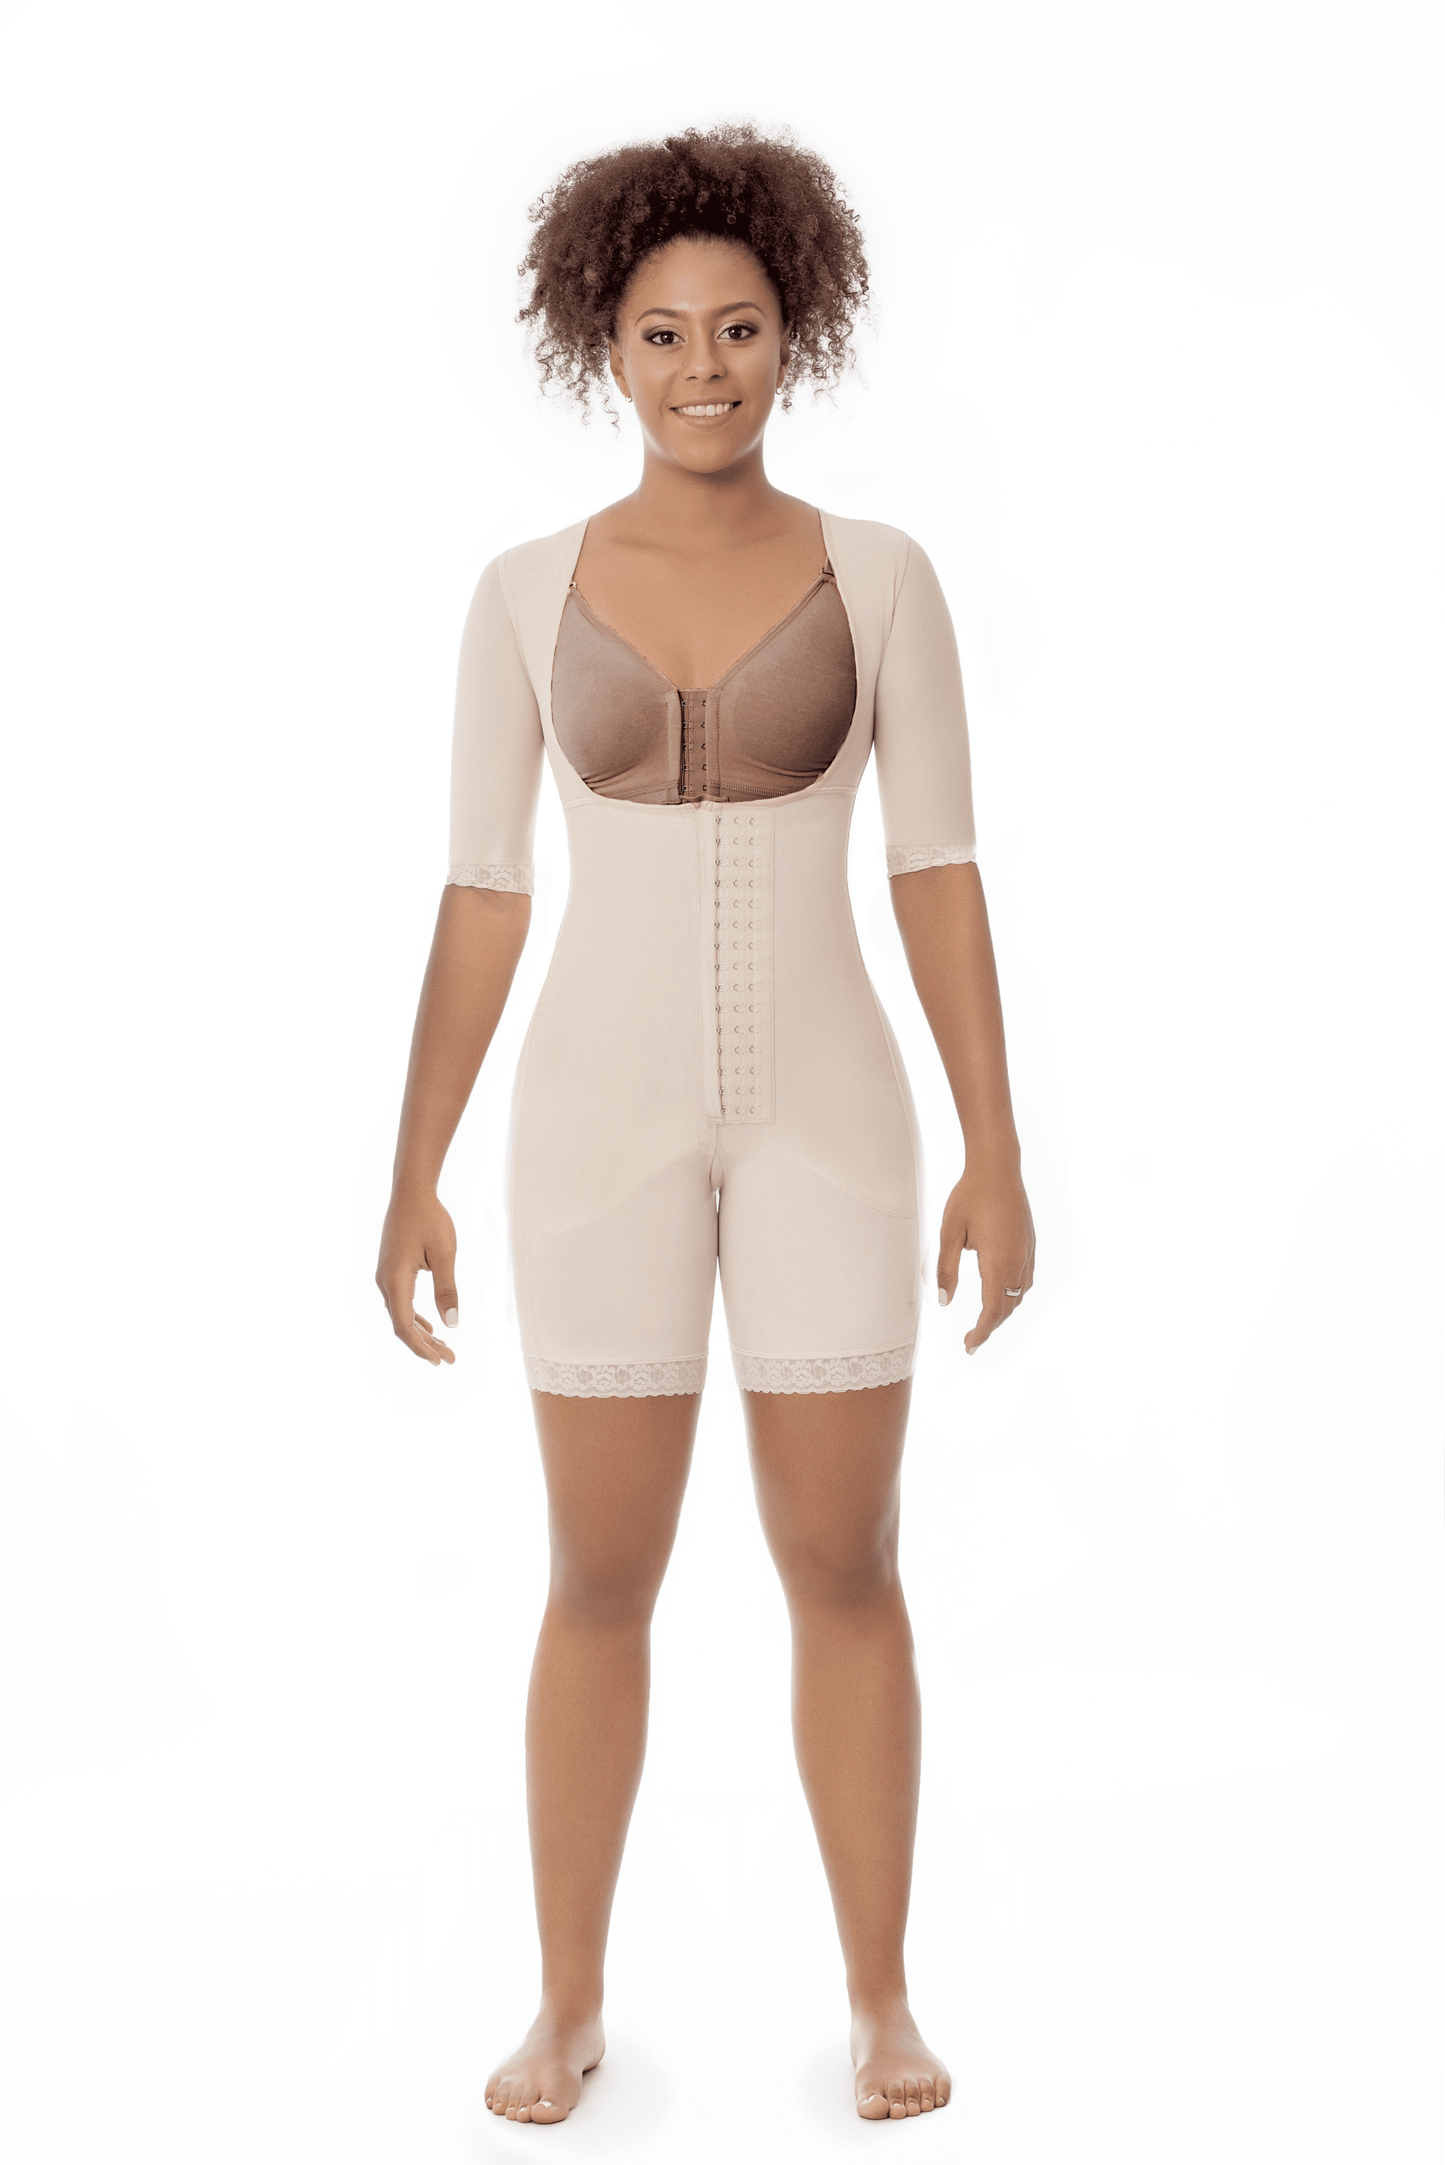 11522 - STAGE 2 BRALESS FULL BODY MID THIGH FAJA WITH SLEEVES